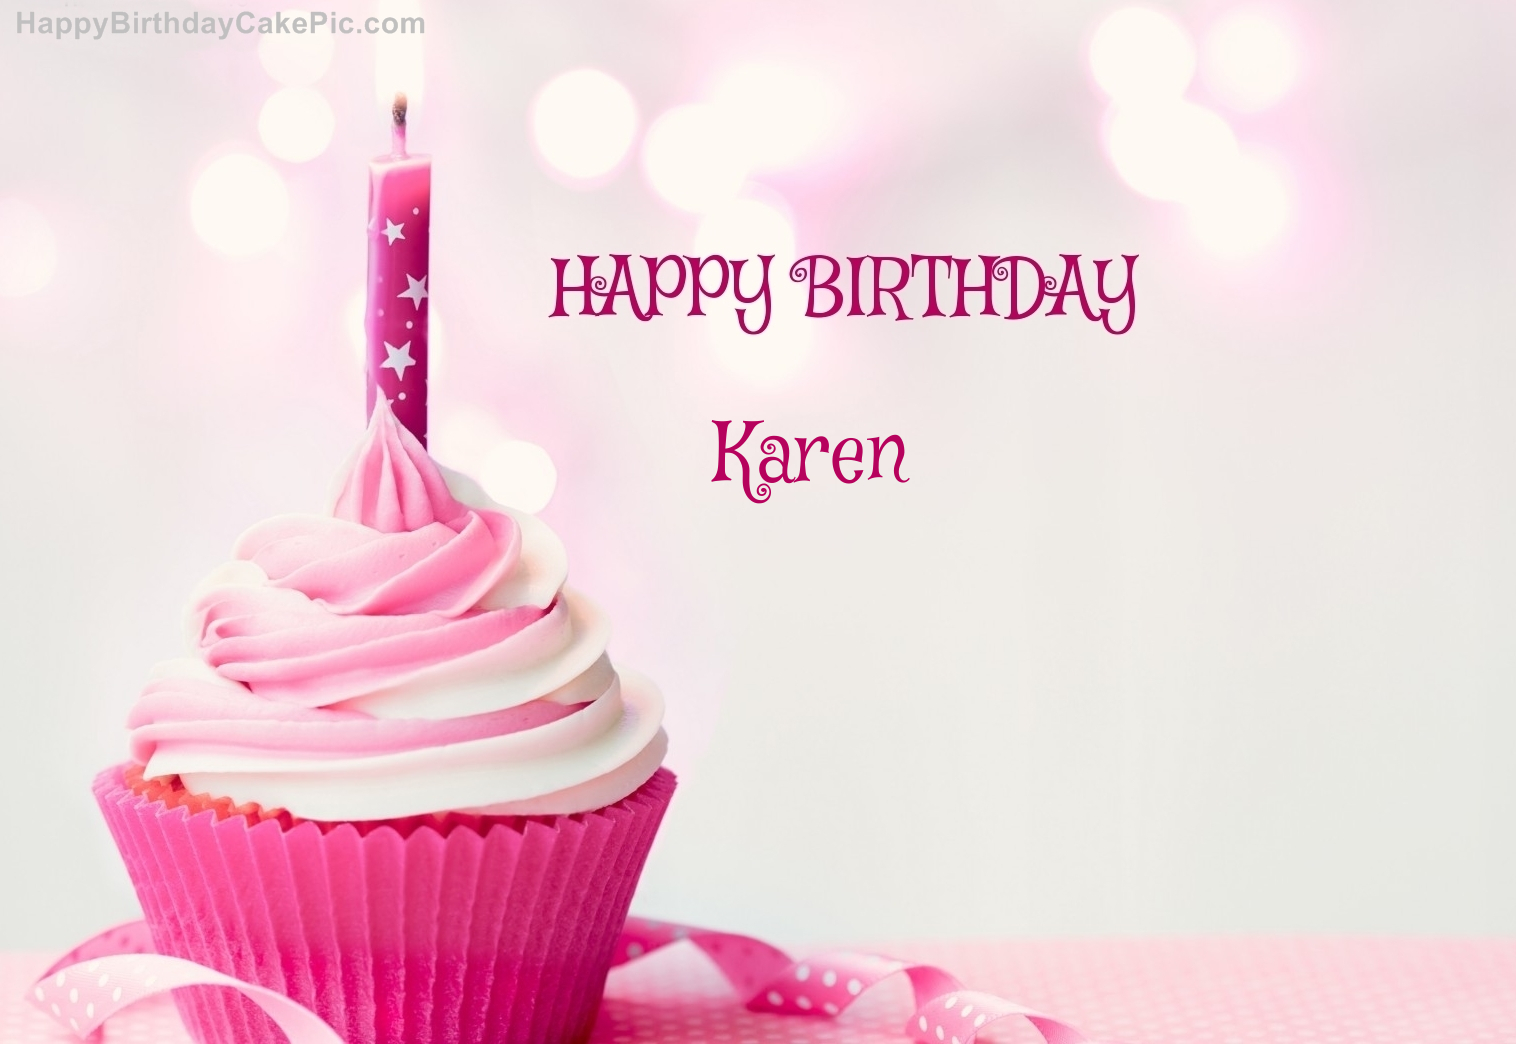 happy-birthday-cupcake-candle-pink-picture-for-Karen.jpg